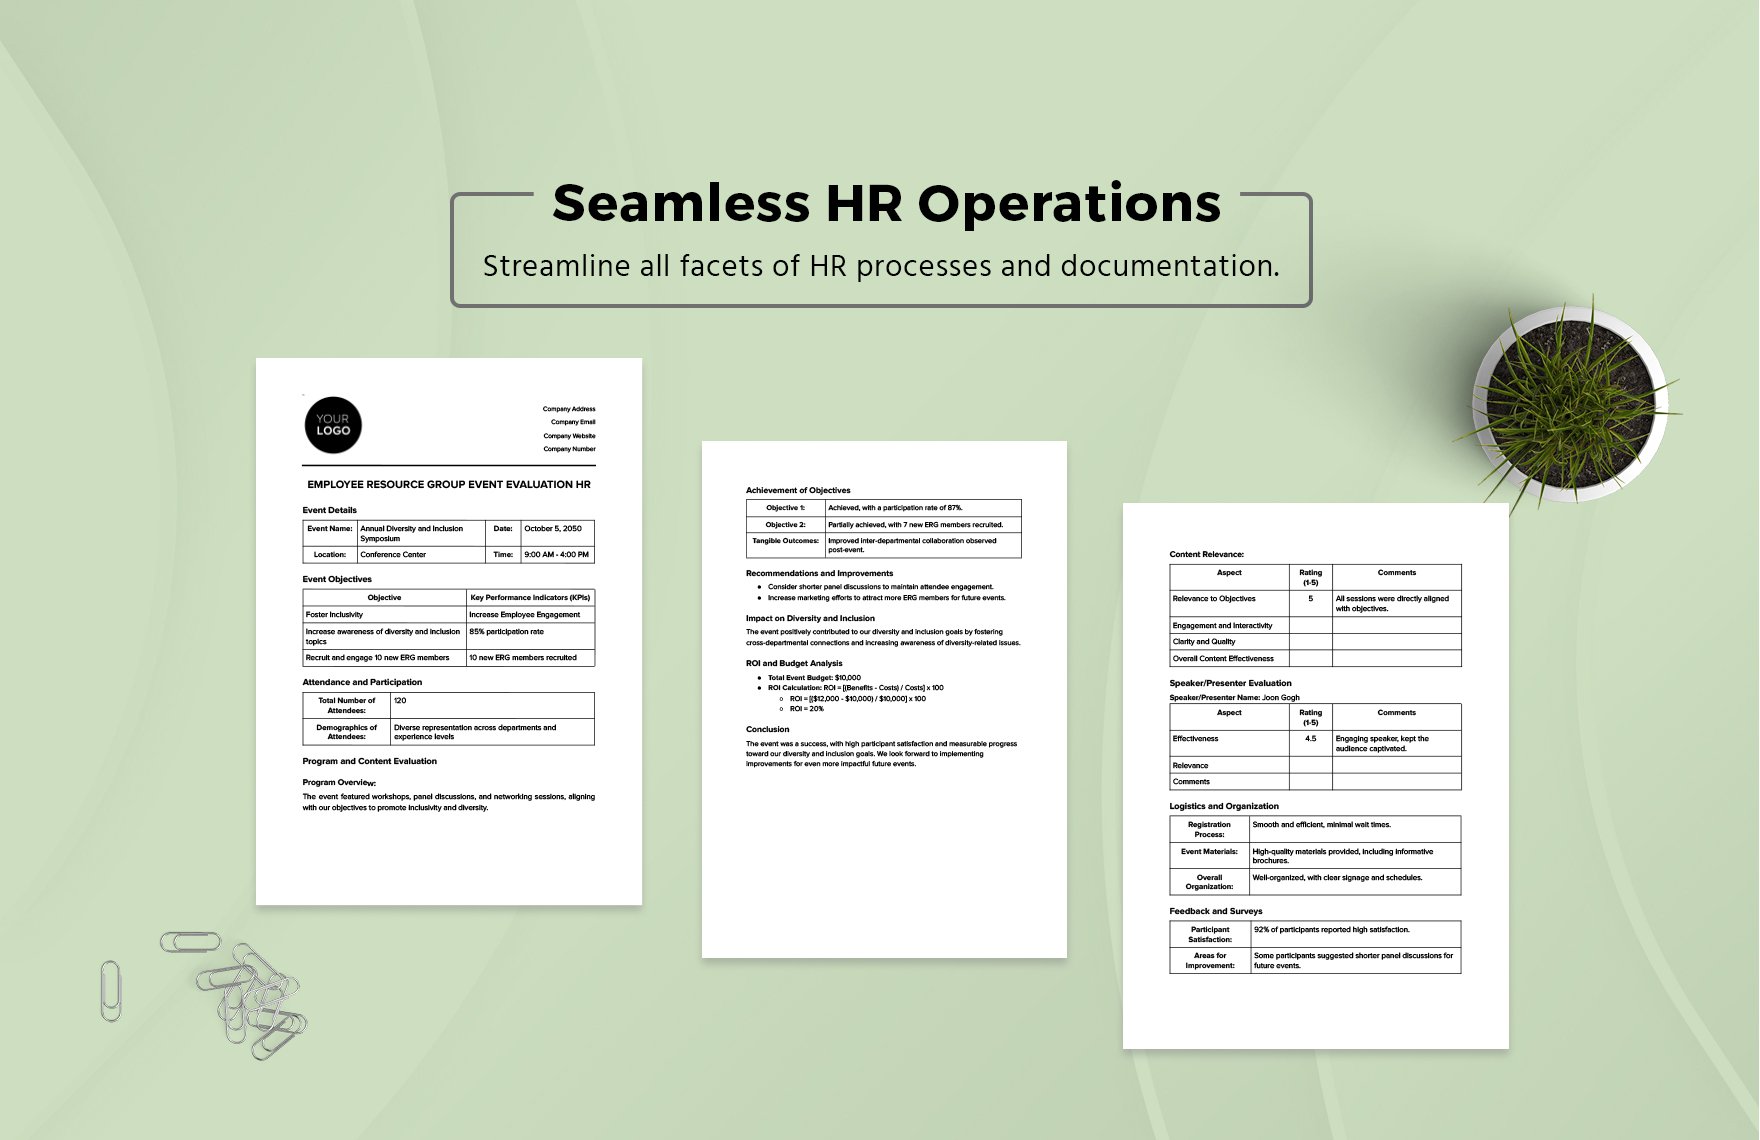 Employee Resource Group Event Evaluation HR Template